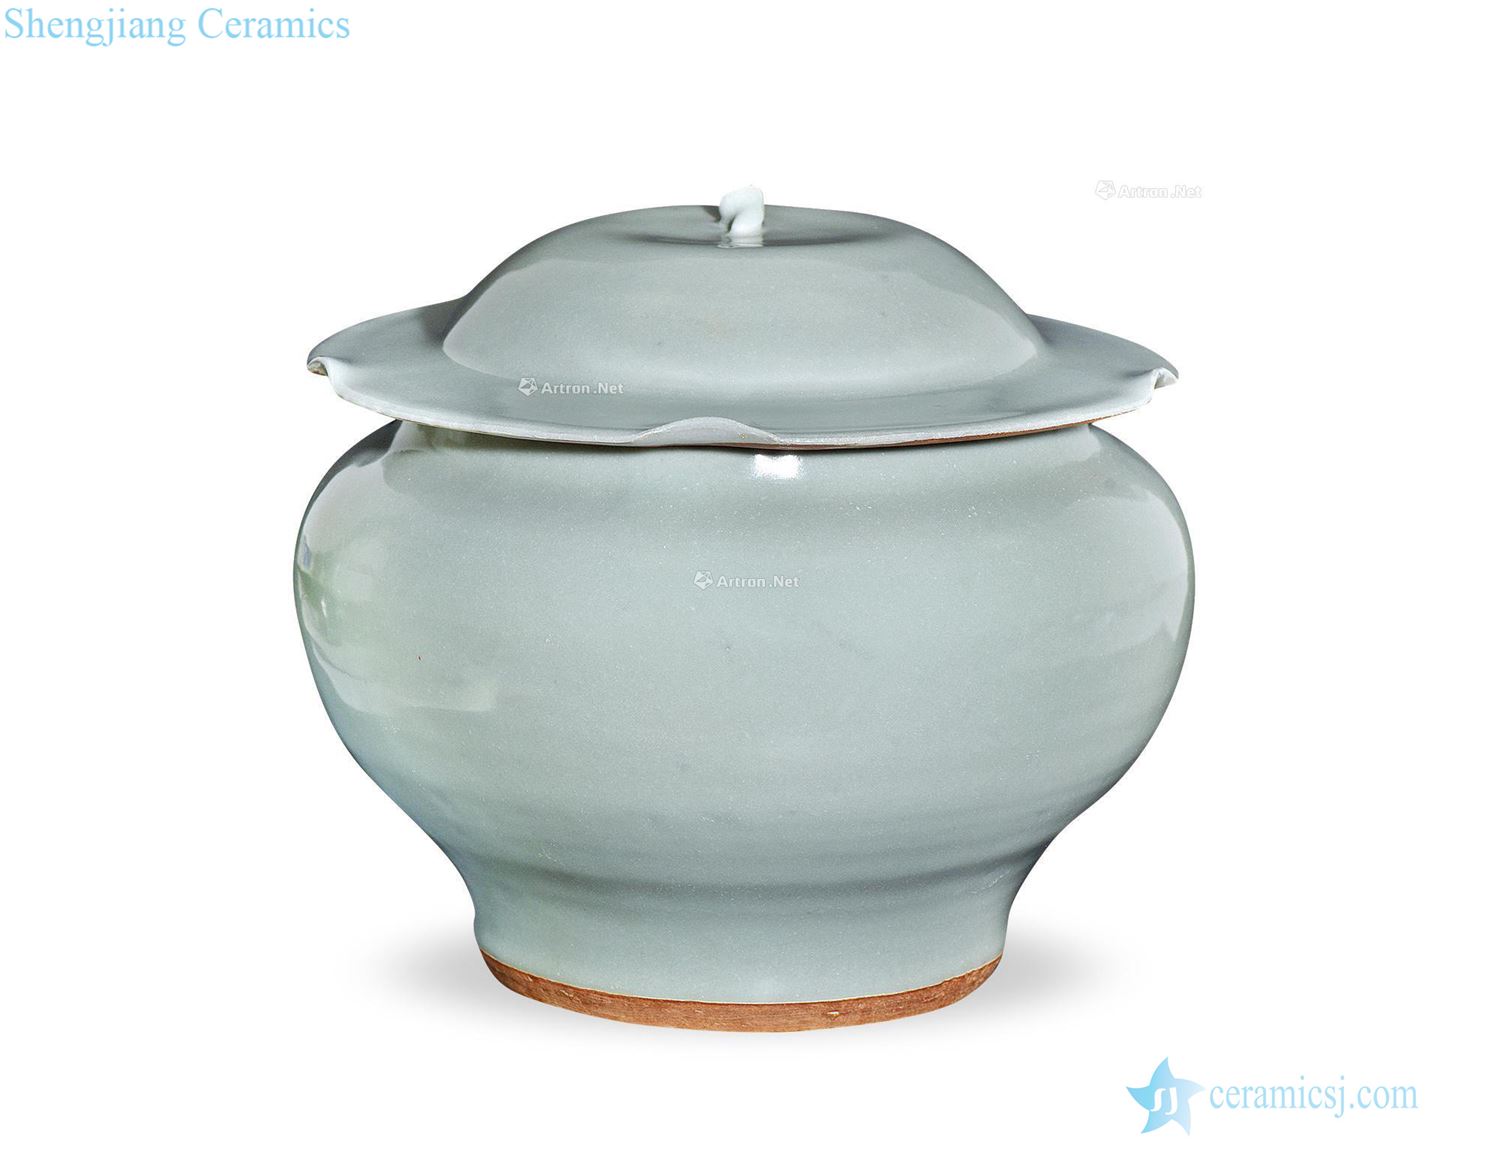 The song dynasty longquan celadon lotus leaf cover tank